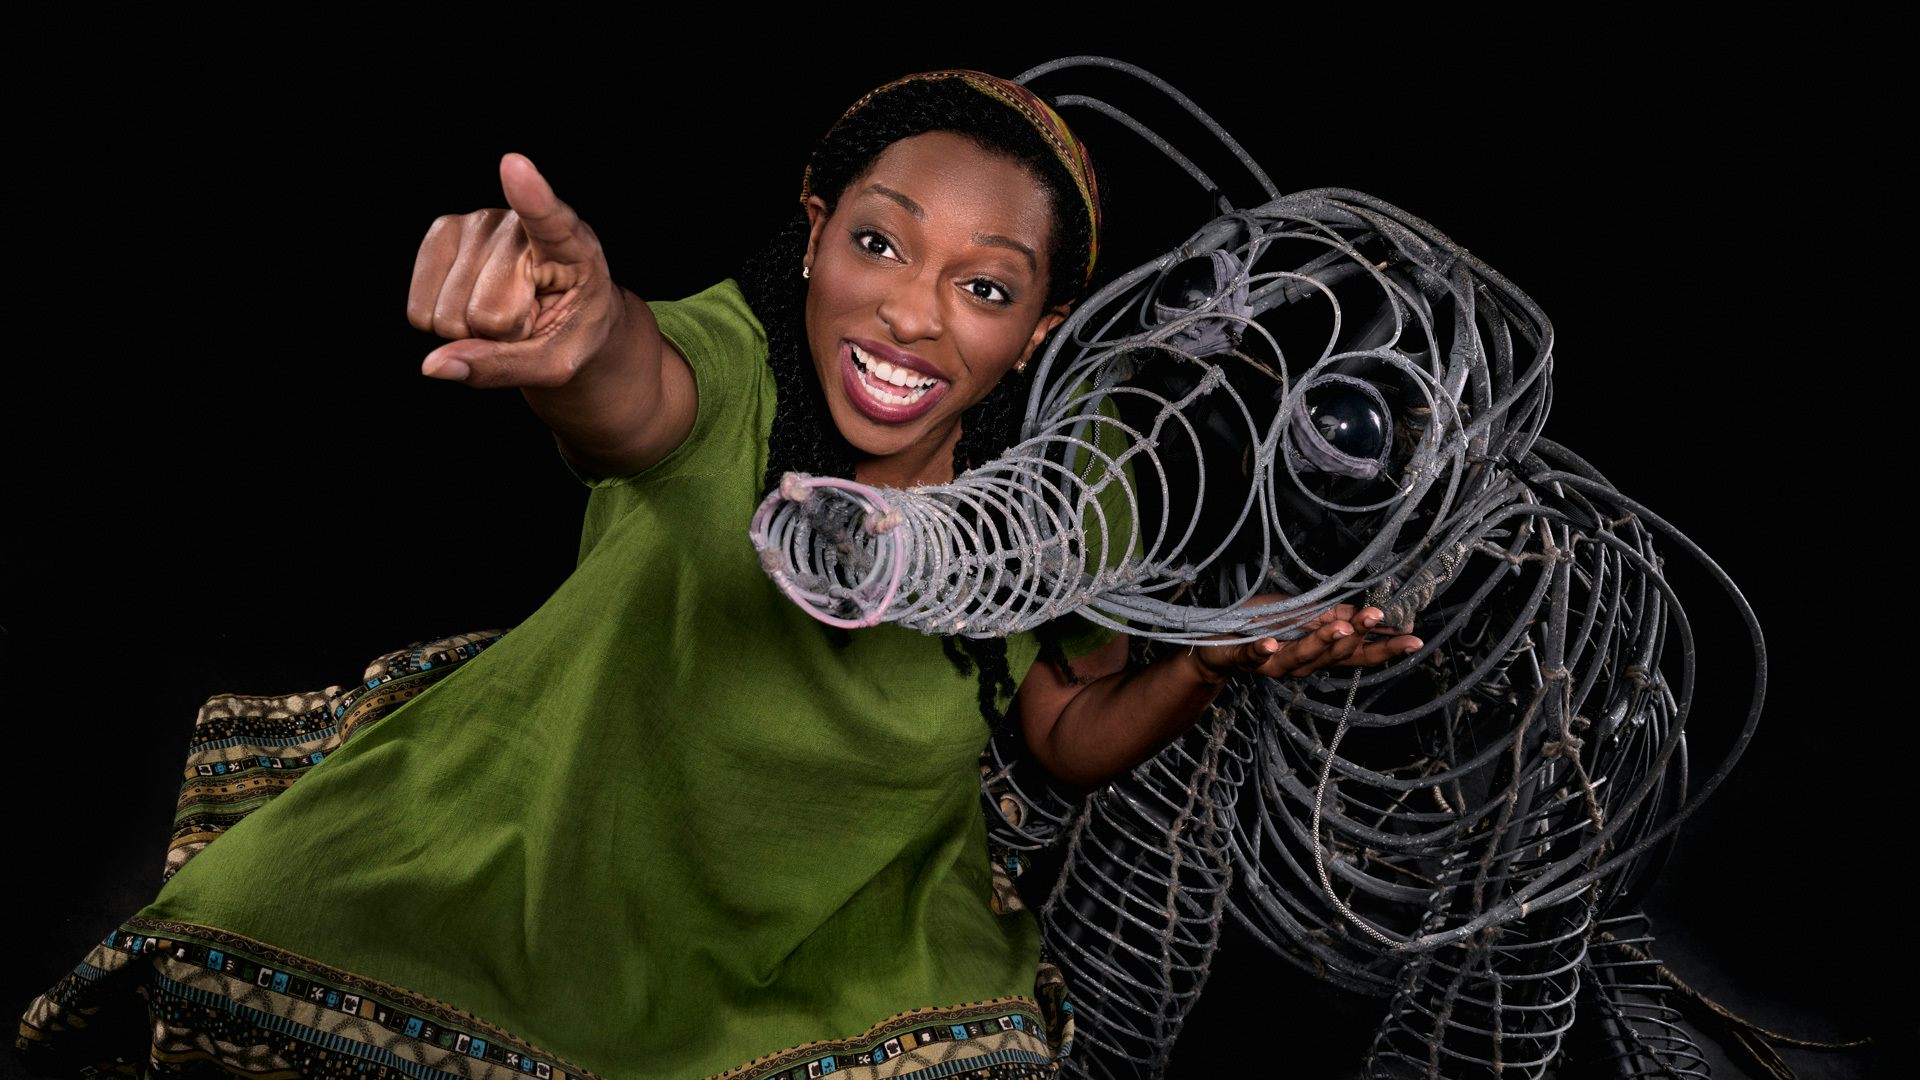 A woman in a green dress holds a wire sculpture/puppet shaped like a small elephant and points off to the distance to the left.